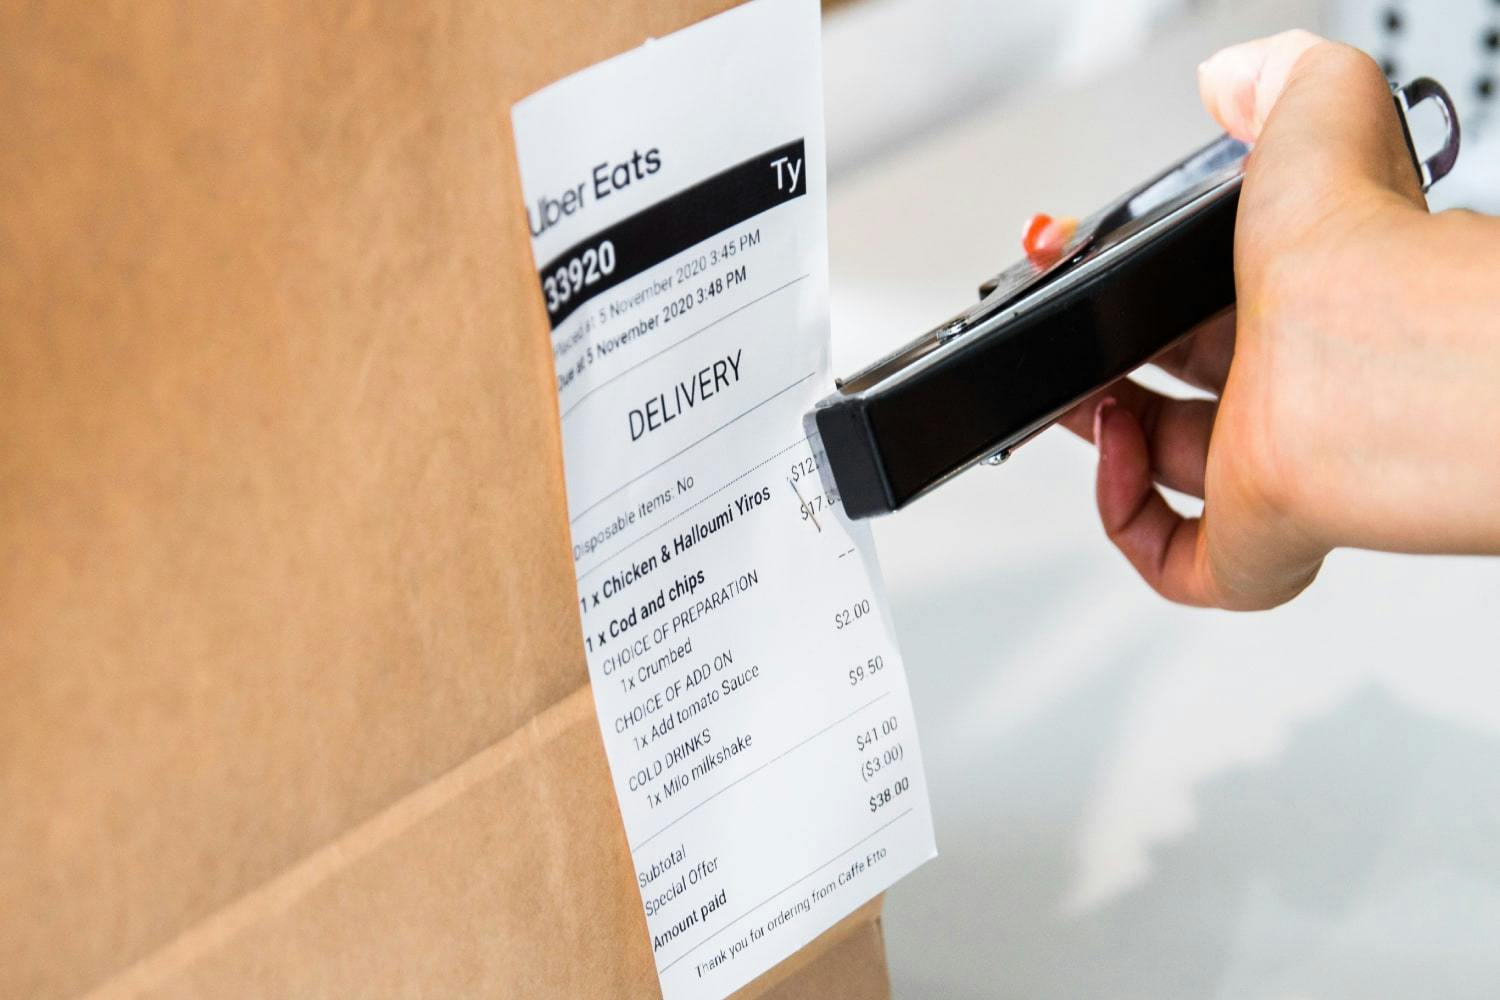 Image of a Uber Eats delivery receipt being stapled onto a food delivery package